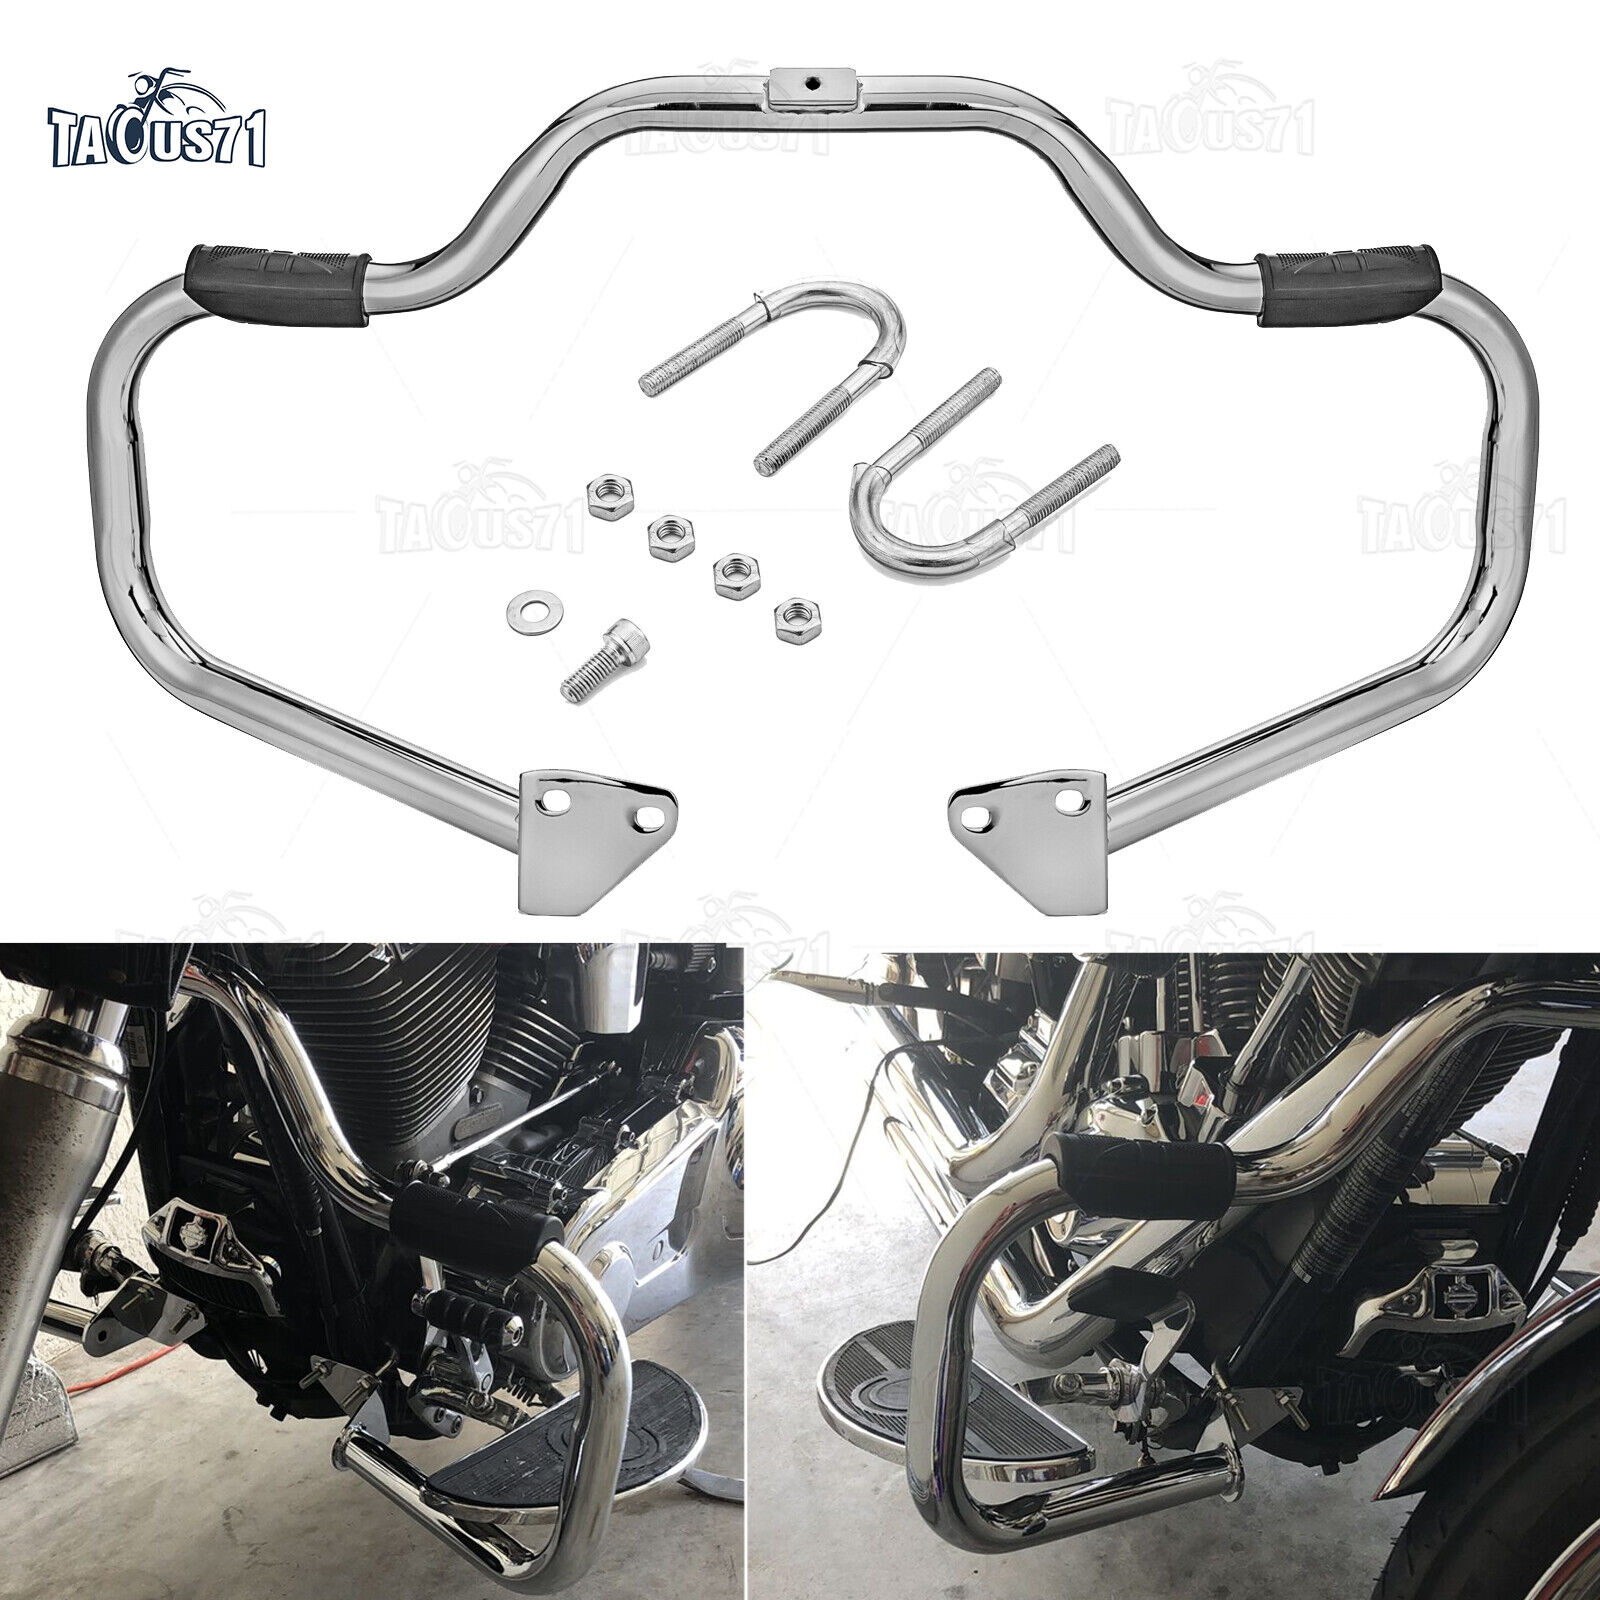 Max 47% OFF Sales of SALE items from new works Chrome Mustache Engine Guard Crash Bar Dyna Wide Fit Harley 06+